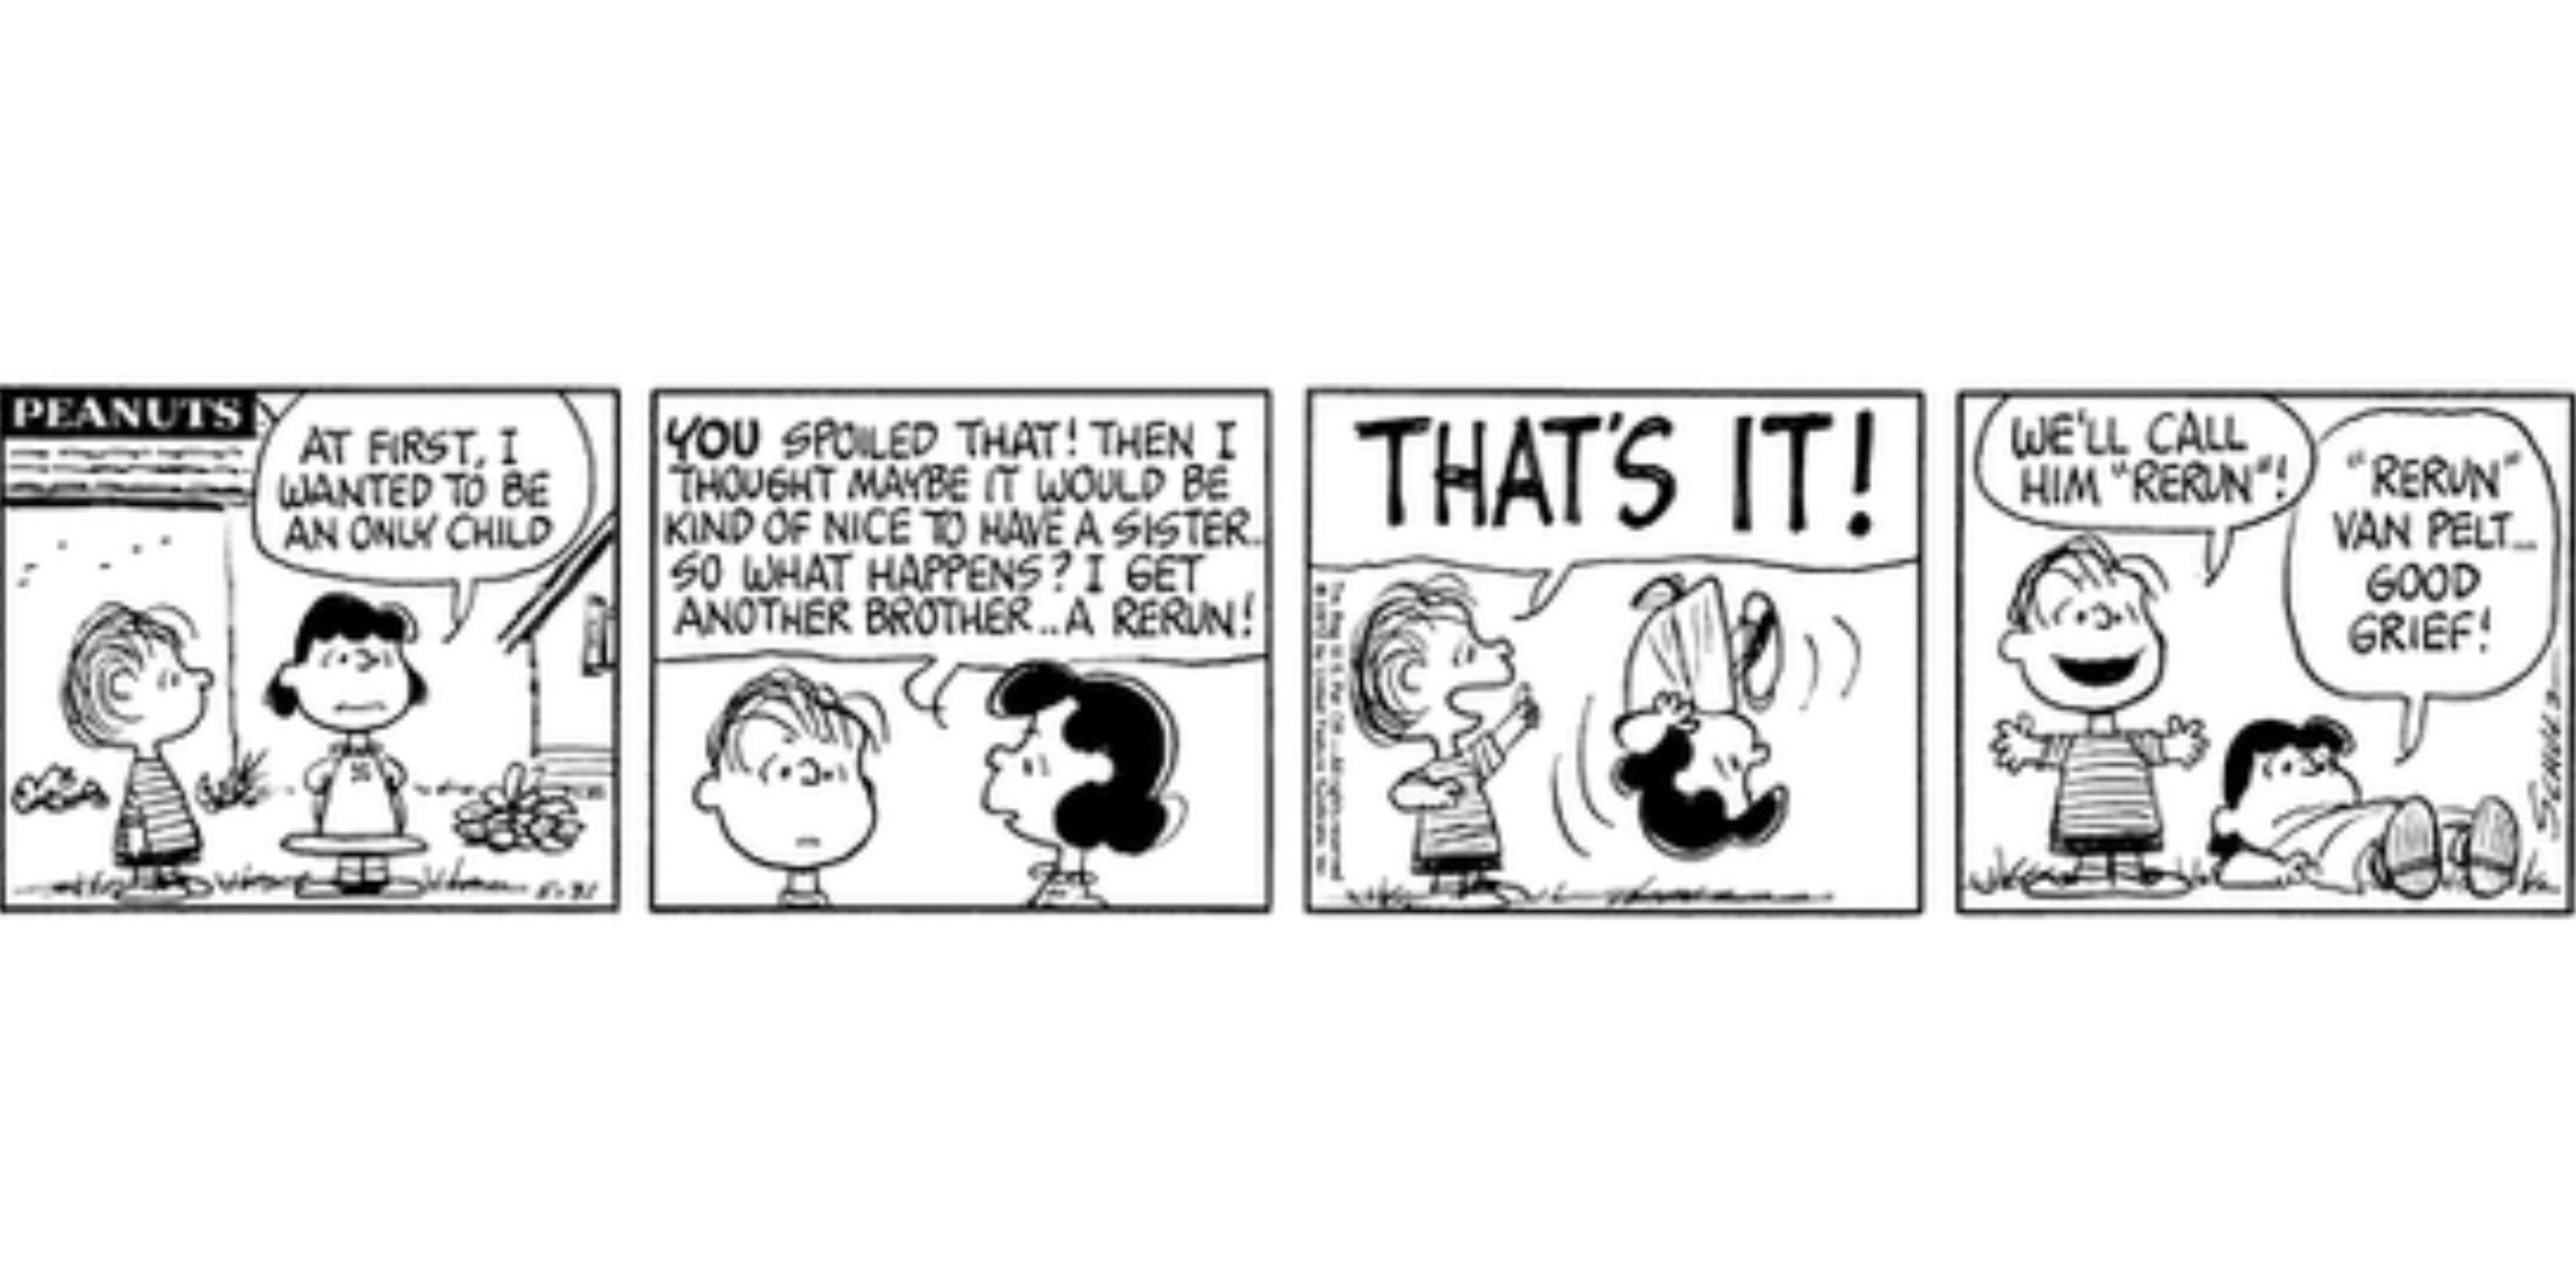 Linus and Lucy naming Rerun.